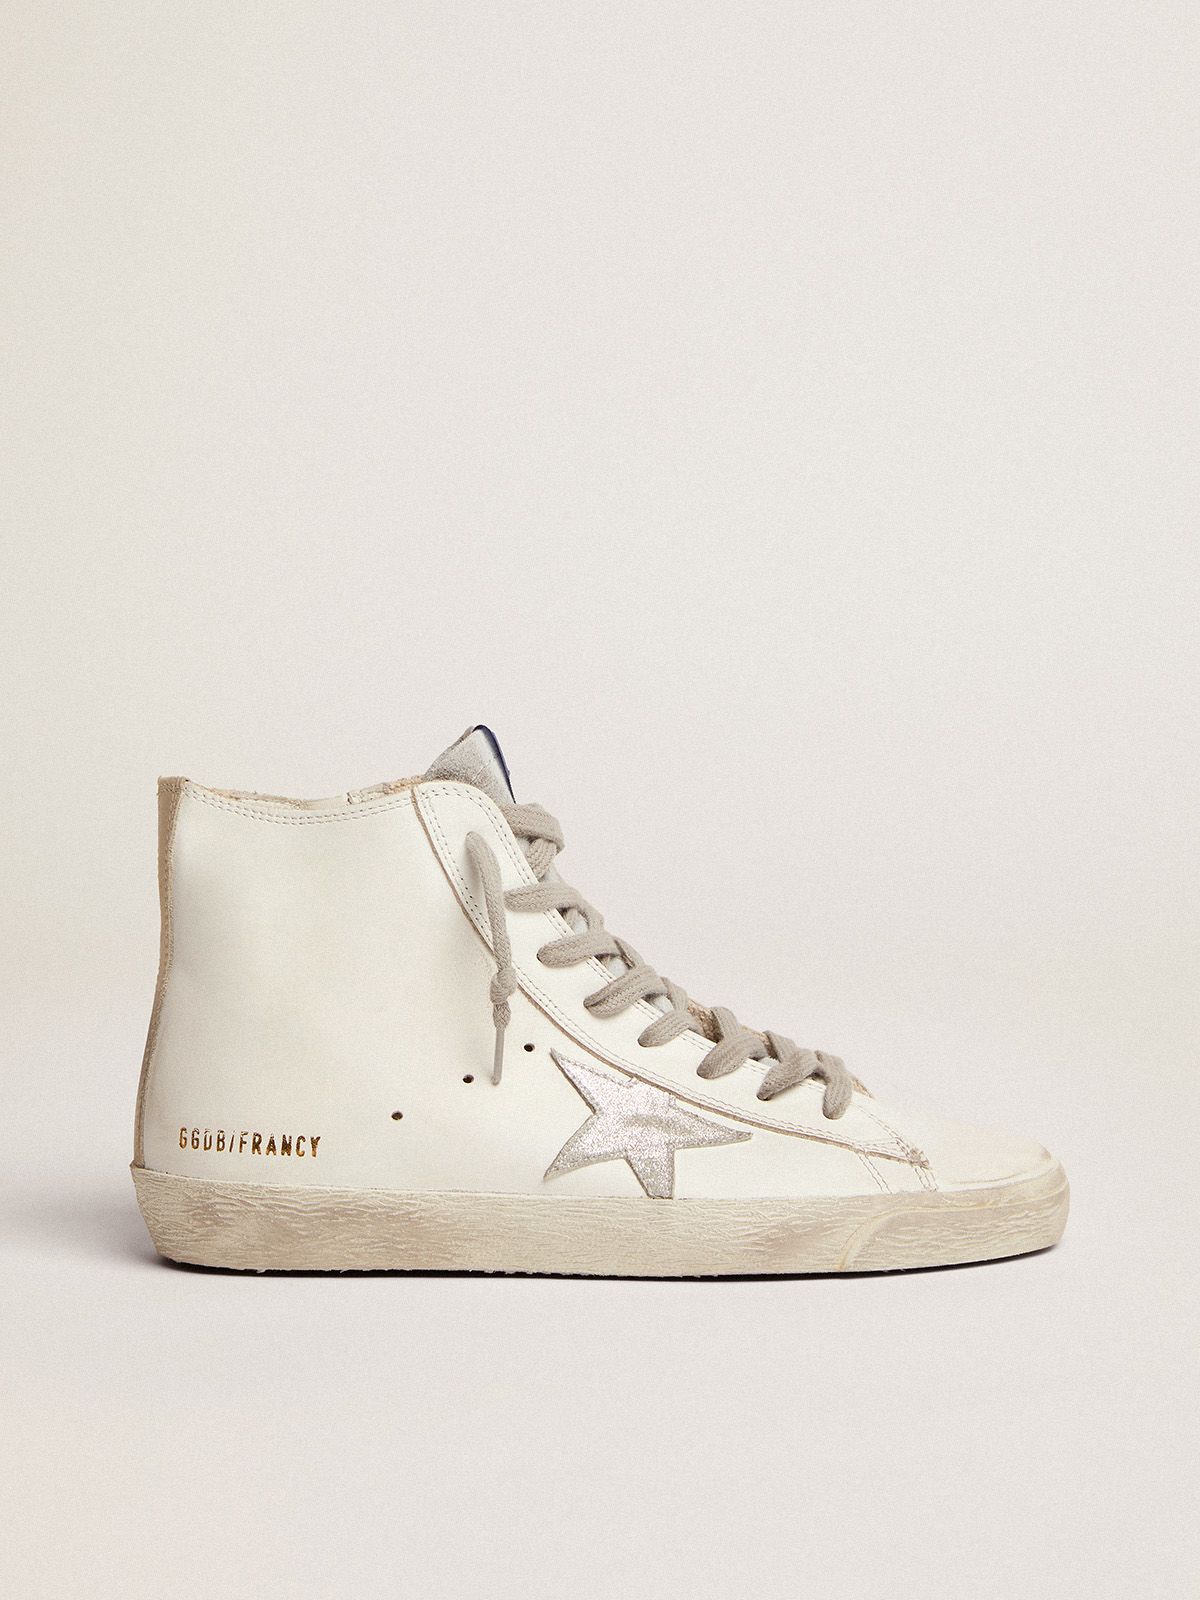 Golden Goose Uomo Saldi Francy sneakers in leather with suede star